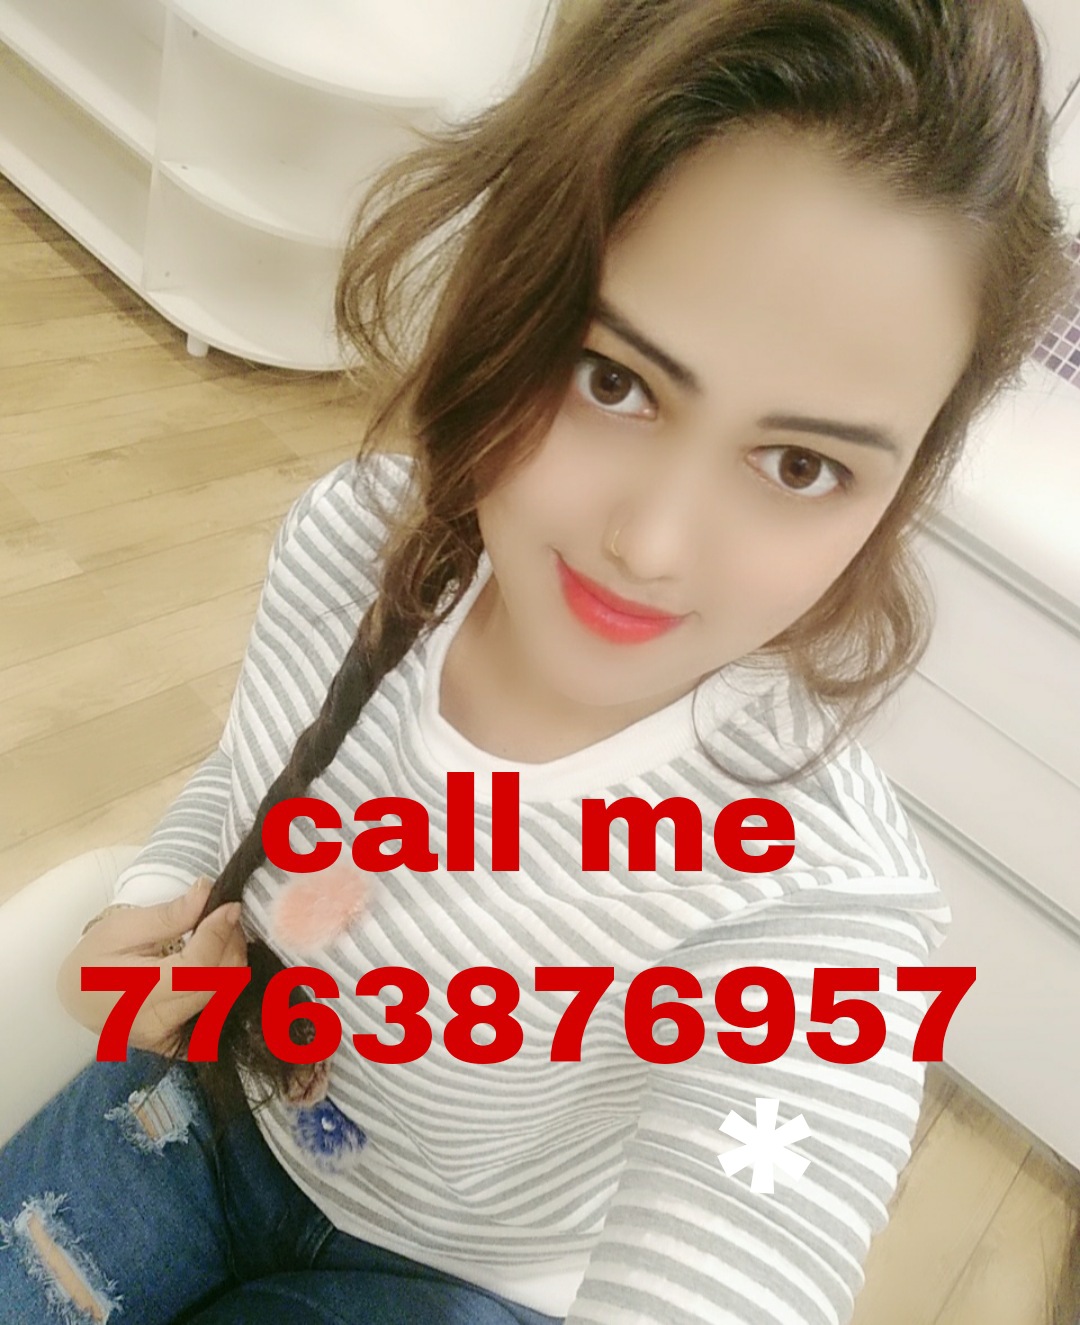 KUKATPALLY CALL GIRL LOW PRICE CASH PAYMENT SERVICE AVAILABLE 